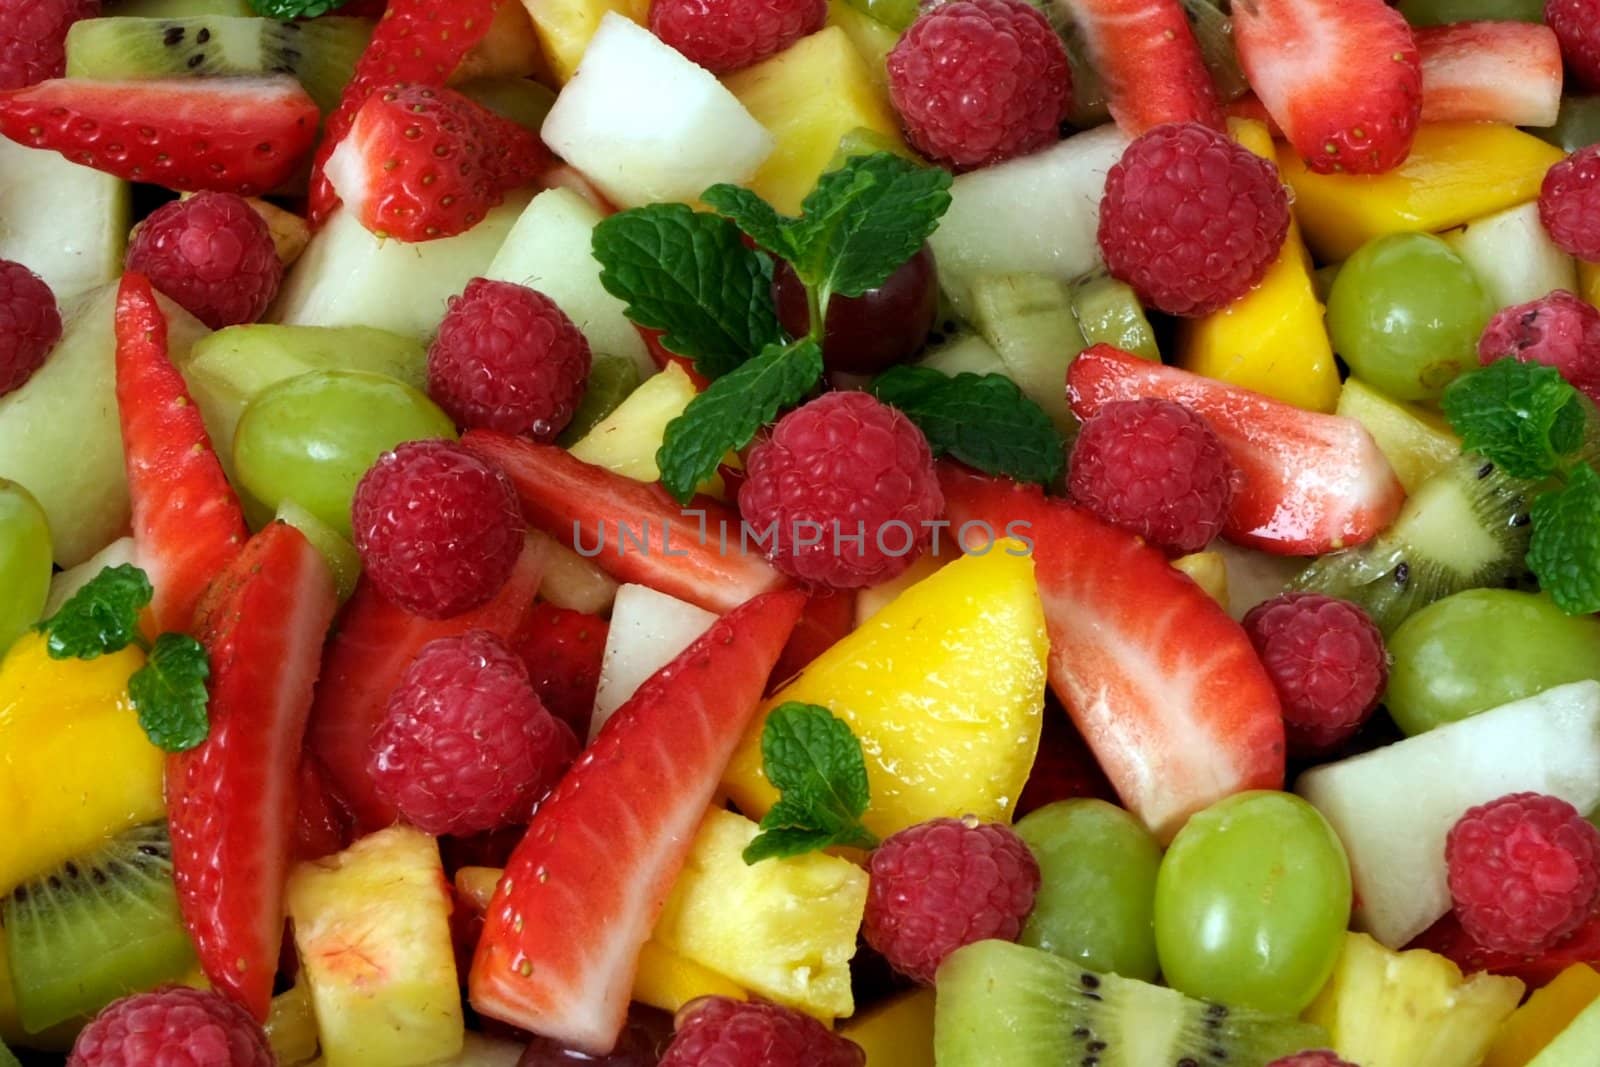 A mixture of fresh fruit prepared for a salad